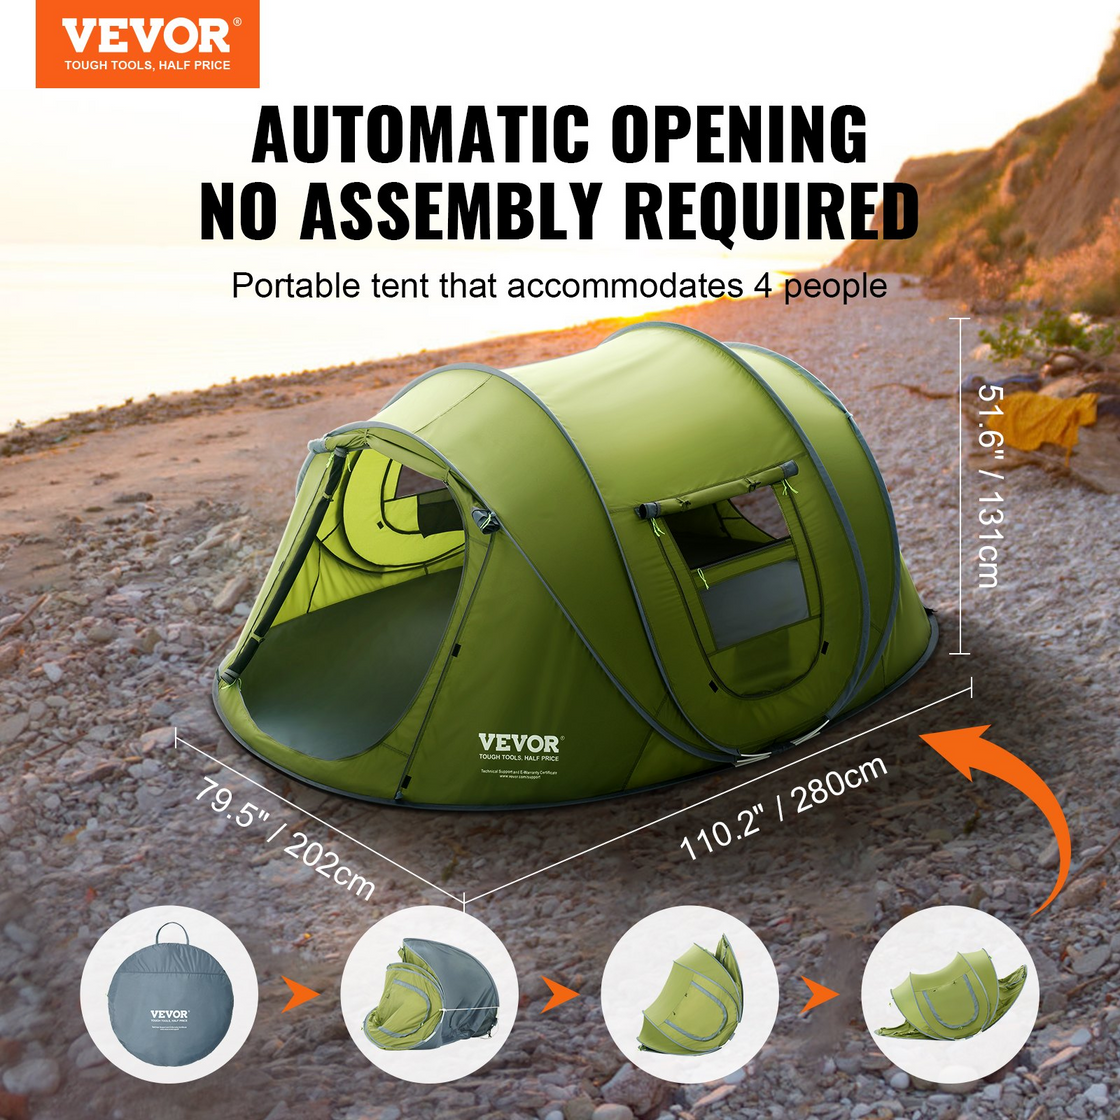 VEVOR Camping Tent - Easy Setup, Waterproof, 9.2 x 6.6 ft Pop Up Tent for 4 Person, with Door and Window - Perfect for Outdoor Family Camping, Hiking, and Hunting